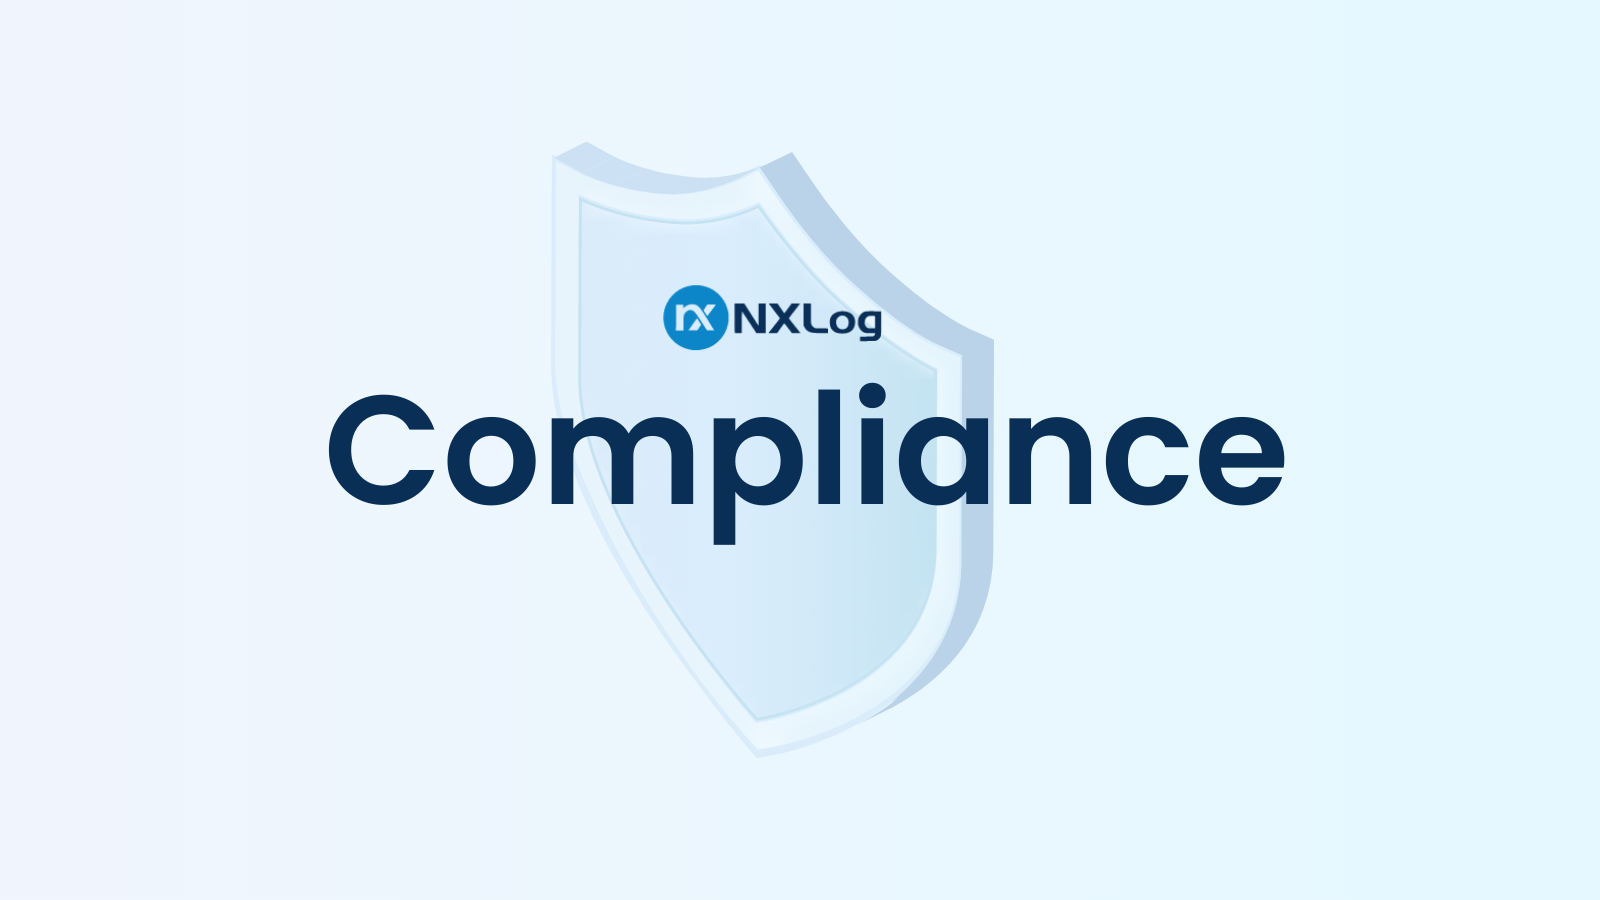 image from Meeting HIPAA Compliance with NXLog